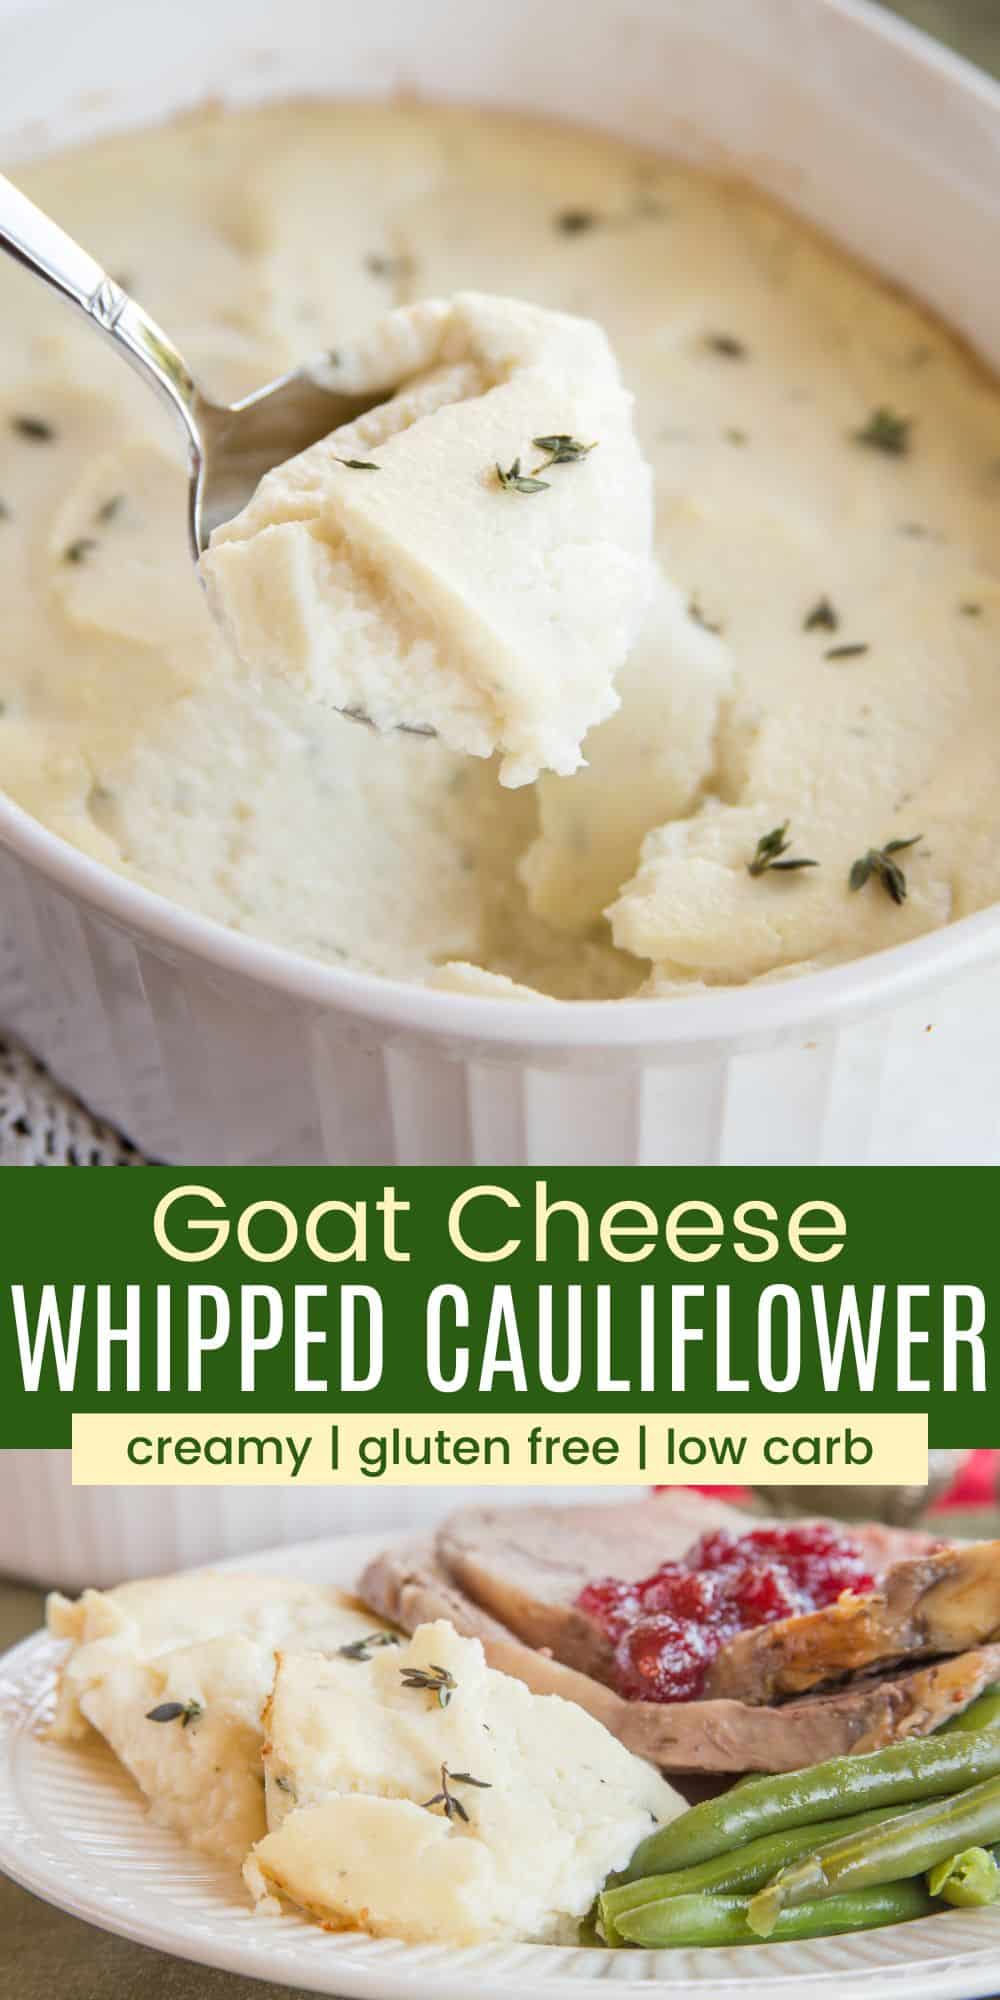 Whipped Cauliflower Gratin with Goat Cheese and Thyme - a light and healthy but still rich and creamy vegetable side dish. Gluten free and low carb too! | cupcakesandkalechips.com